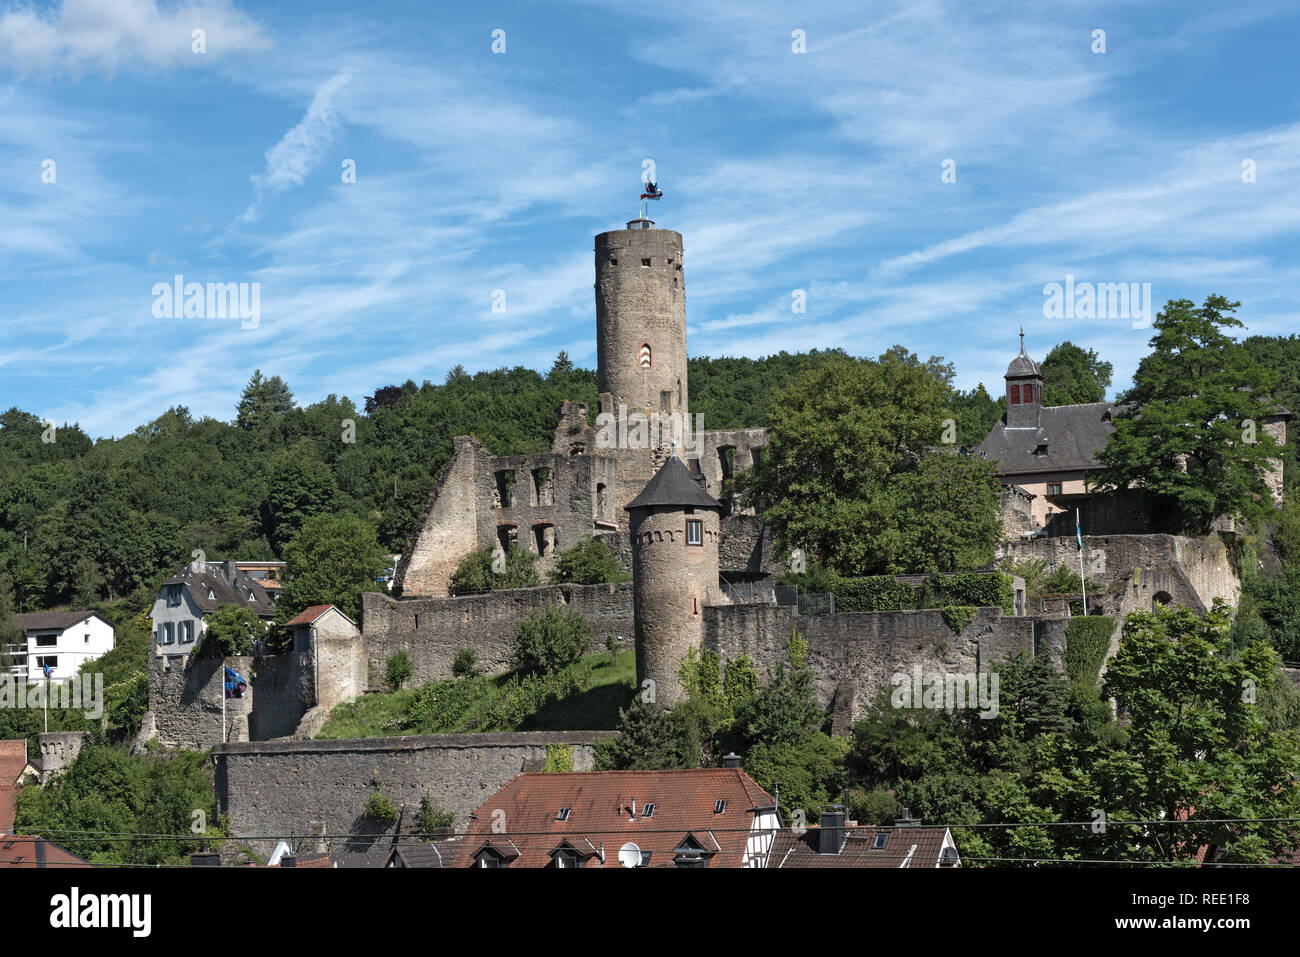 View of the castle ruin Eppstein in Hesse, Germany Stock Photo